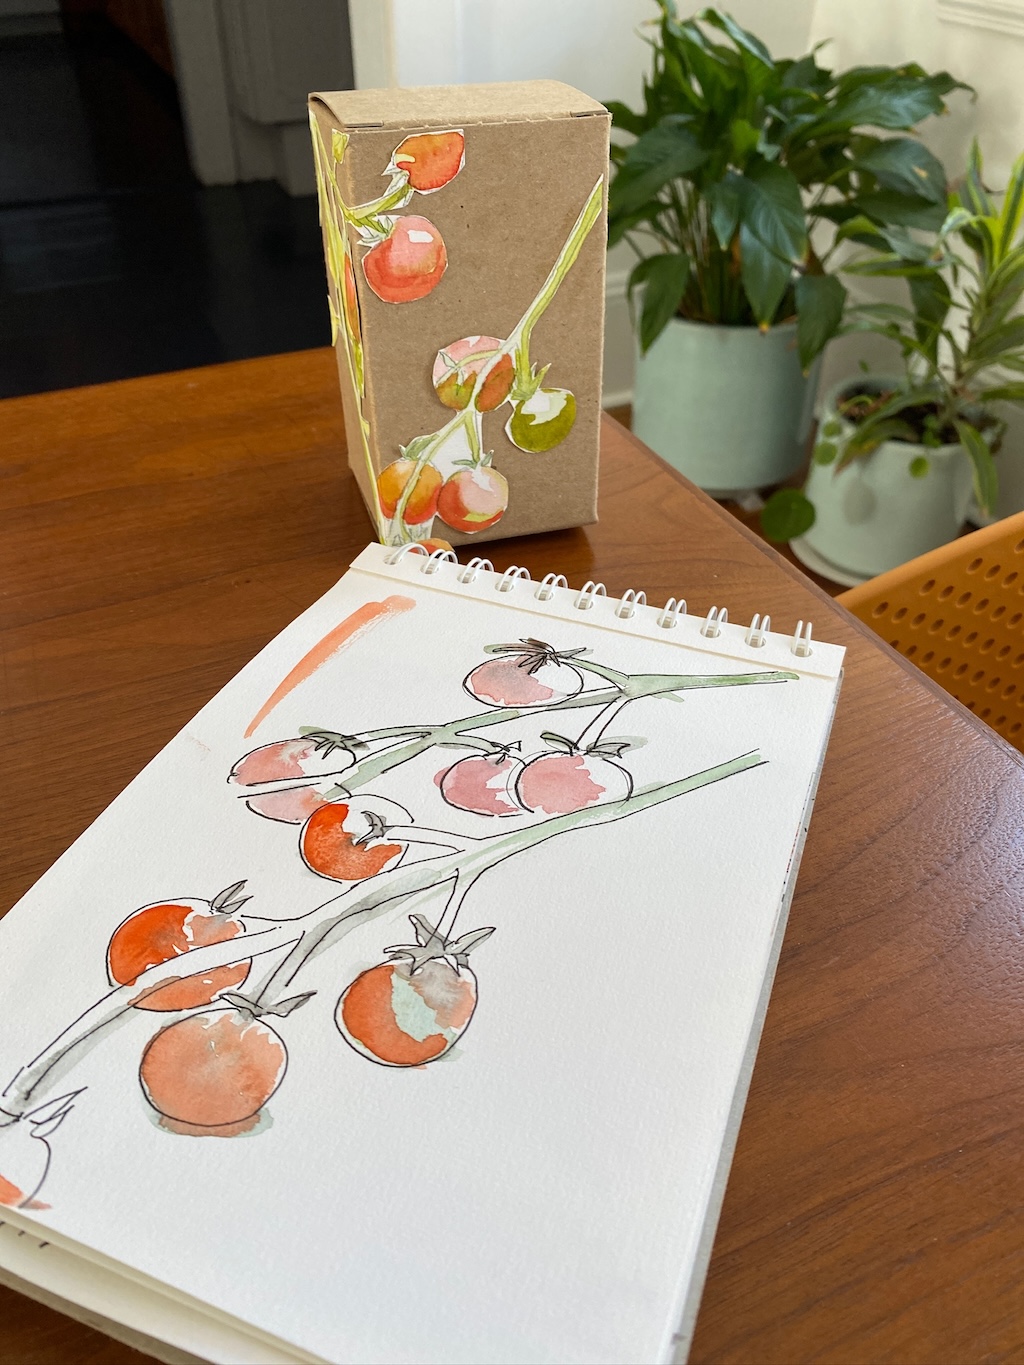 Sketch of tomatoes in a spiral bound sketchbook.